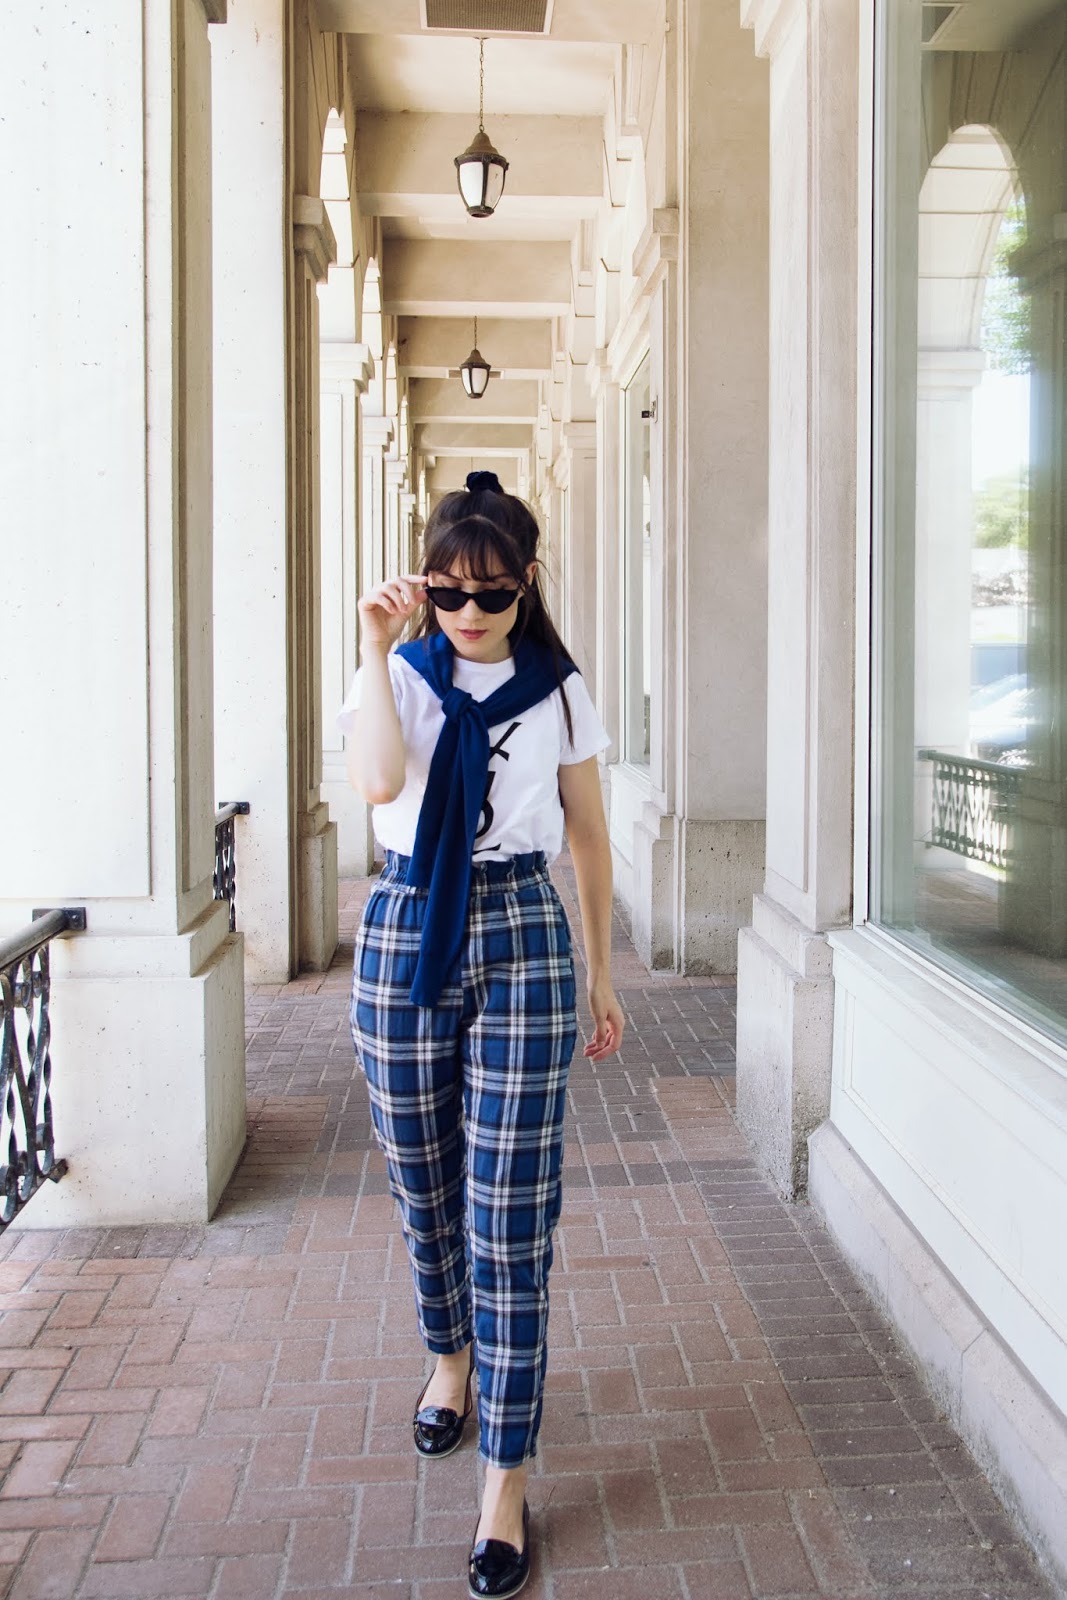 Plaid Pants In The Summer | Carolina Pinglo